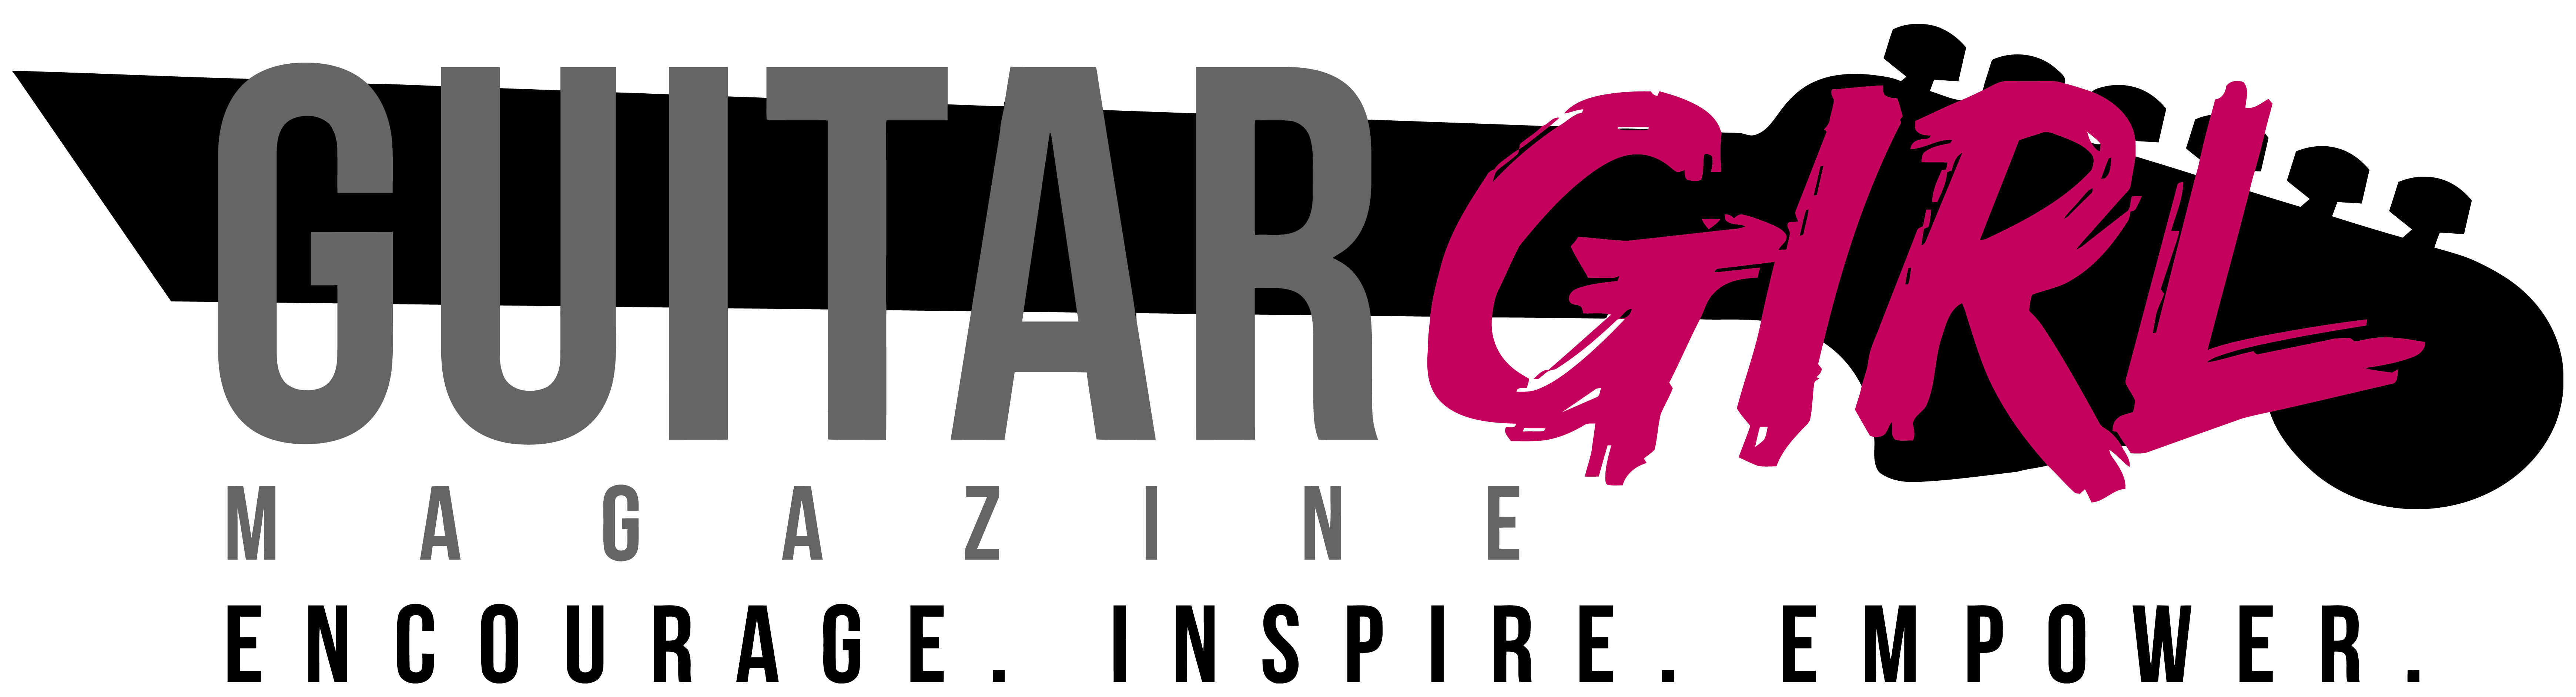 Tara Low of Guitar Girl Magazine Named As An Advisory Board Member For The WiMN